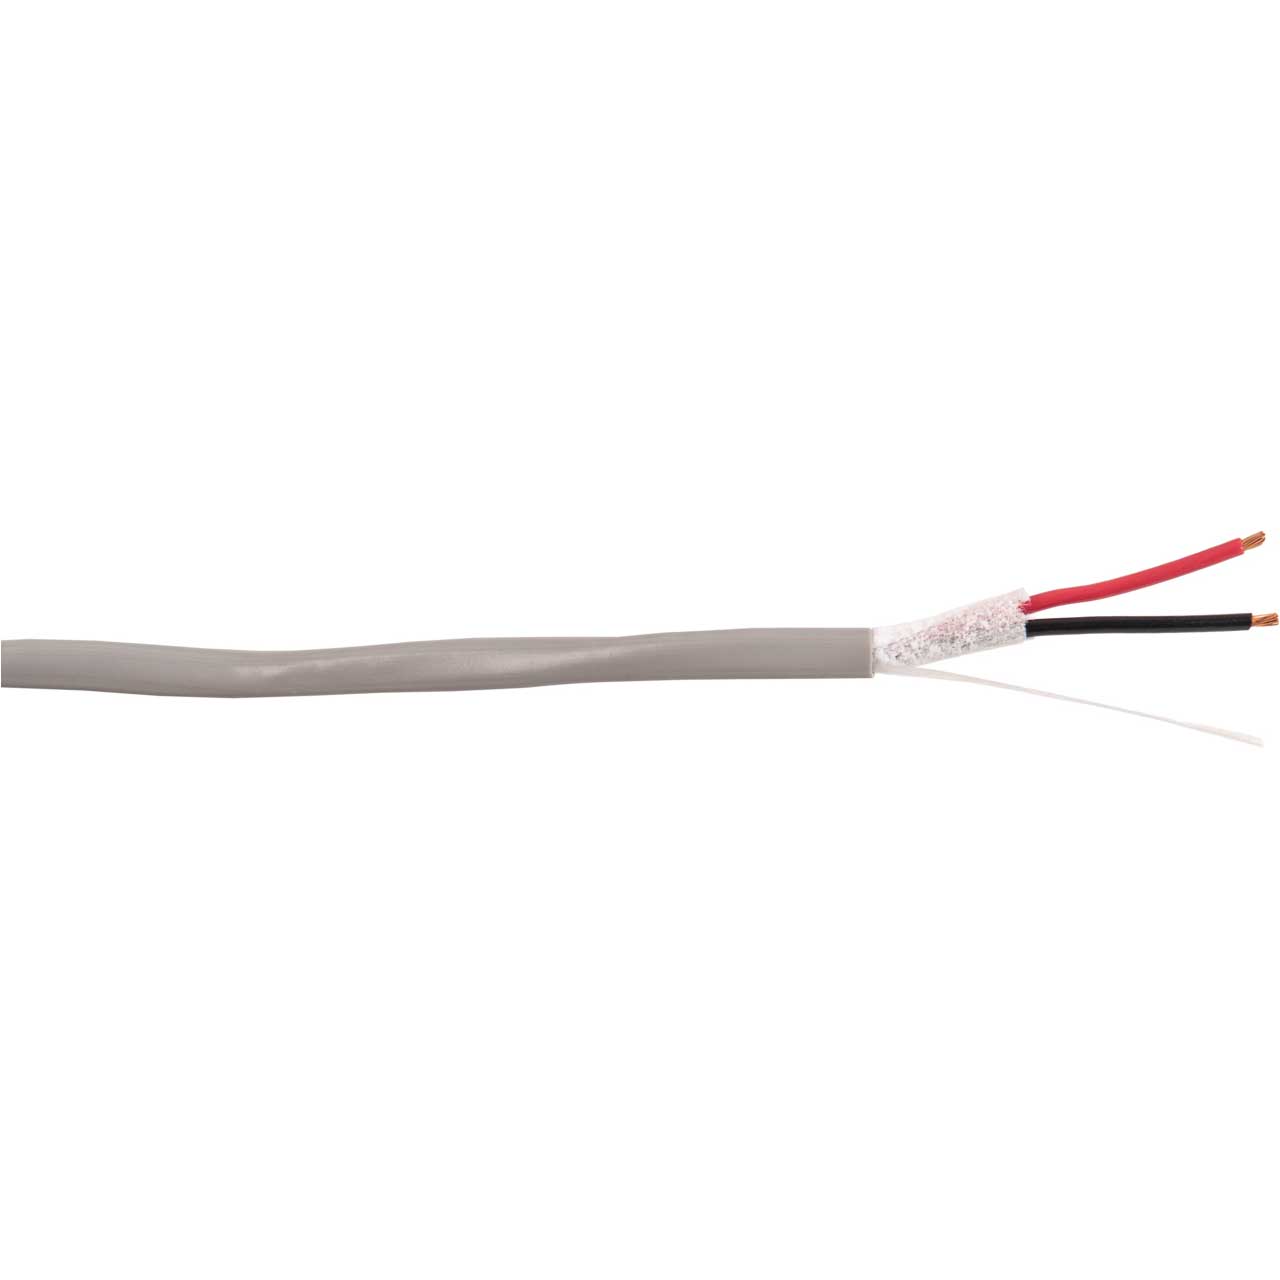 West Penn AQC224 Aquaseal 18 AWG 2 Conductor PLTC Unshielded Cable - 500 Foot WP-AQC224500GY